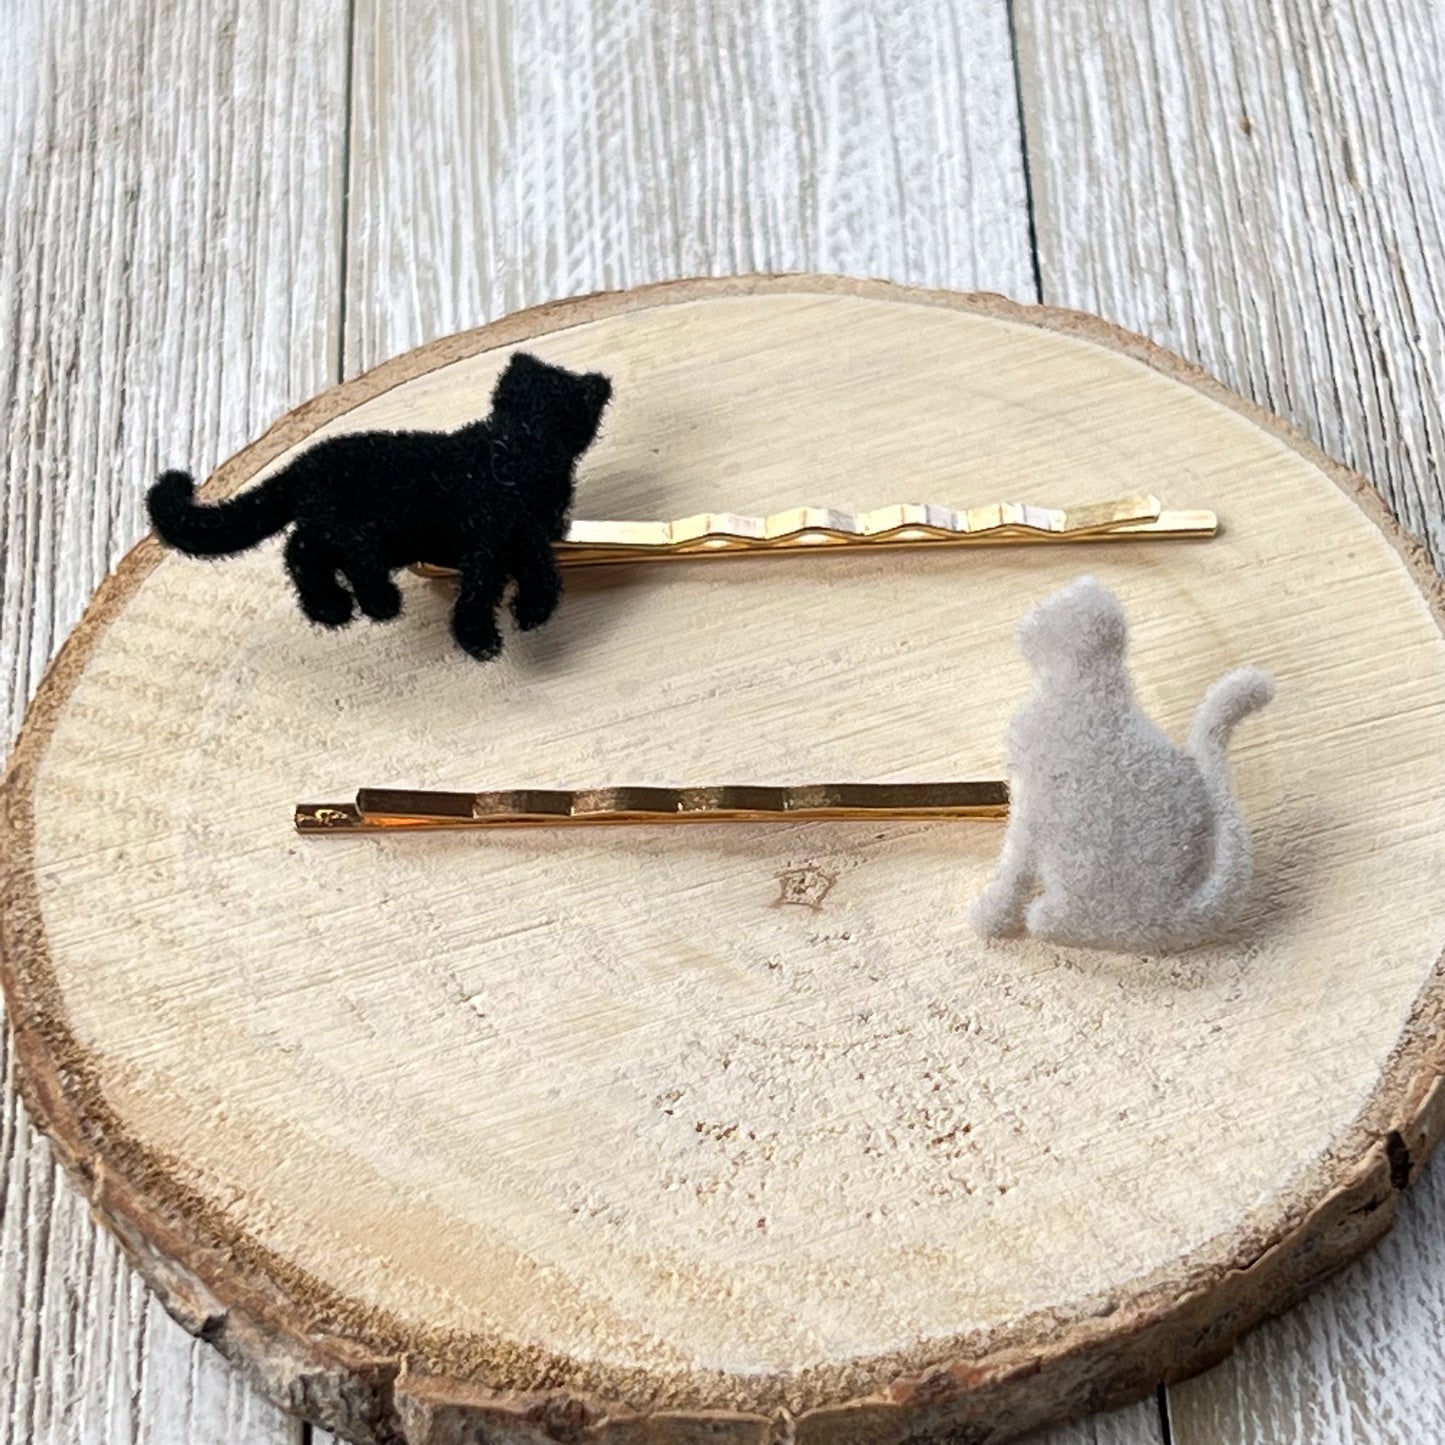 Gray & Black Felted Cat Hair Pins - Quirky Accessories for Feline-Inspired Hairstyles